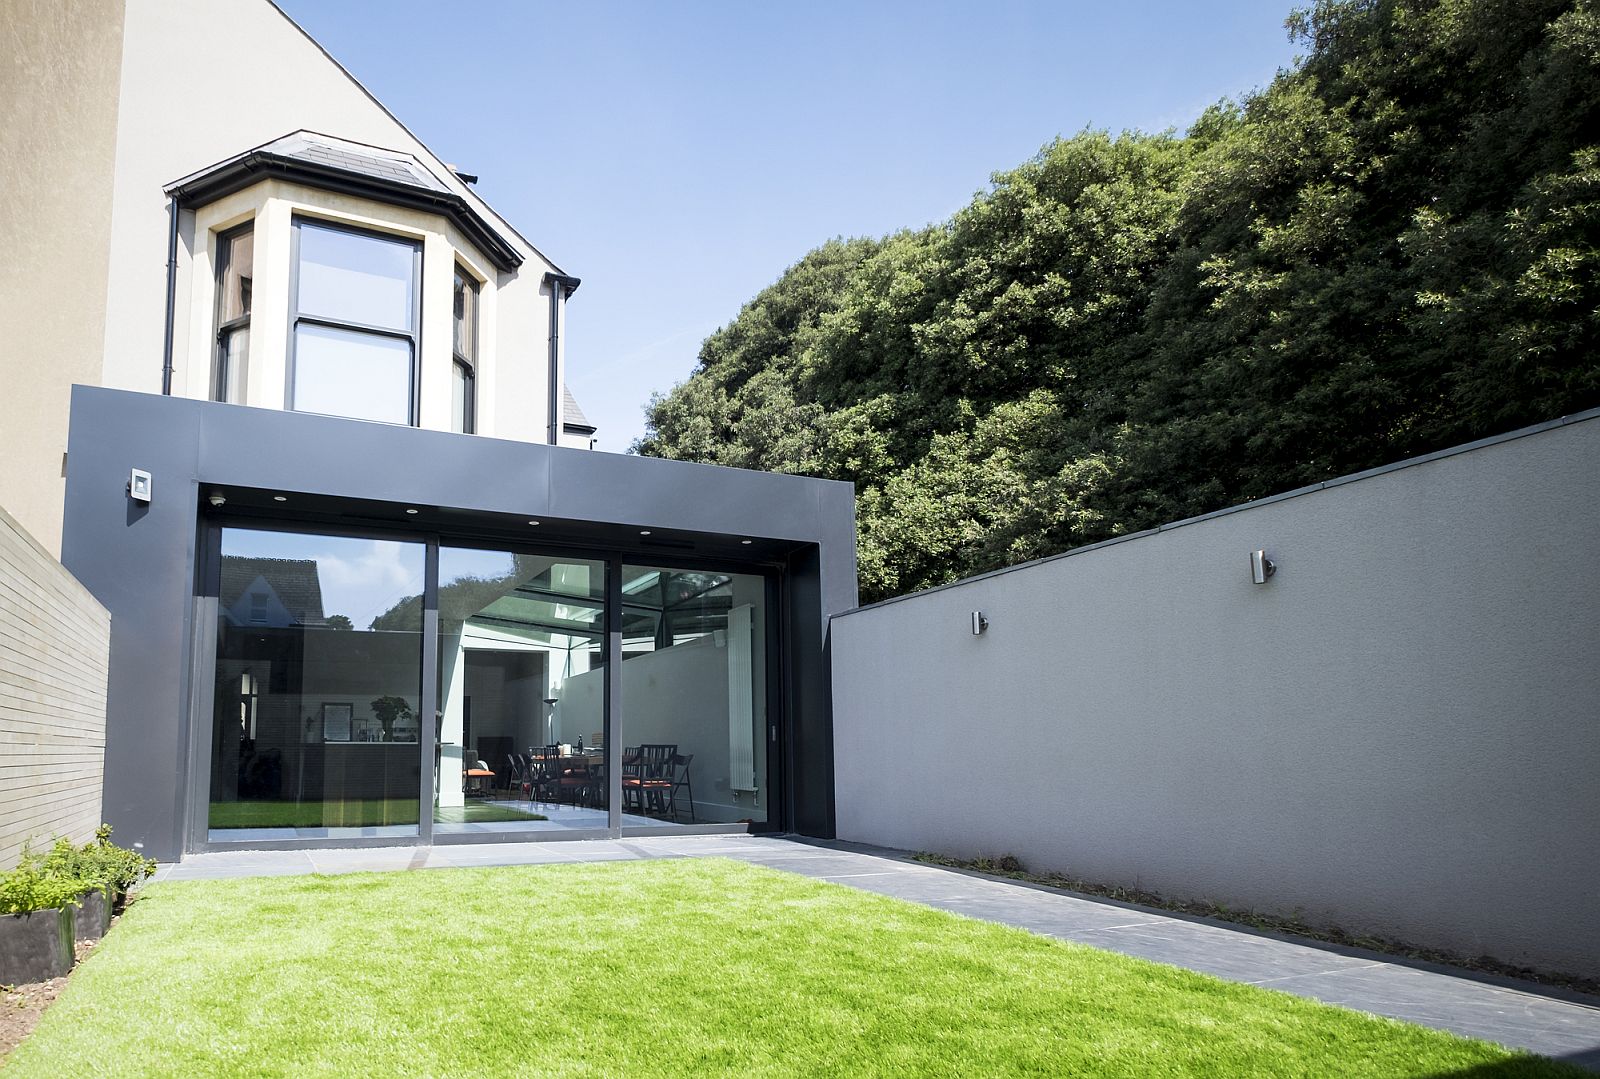 Modern Revamp Involving a Glass Roof Transforms This Dark Victorian House